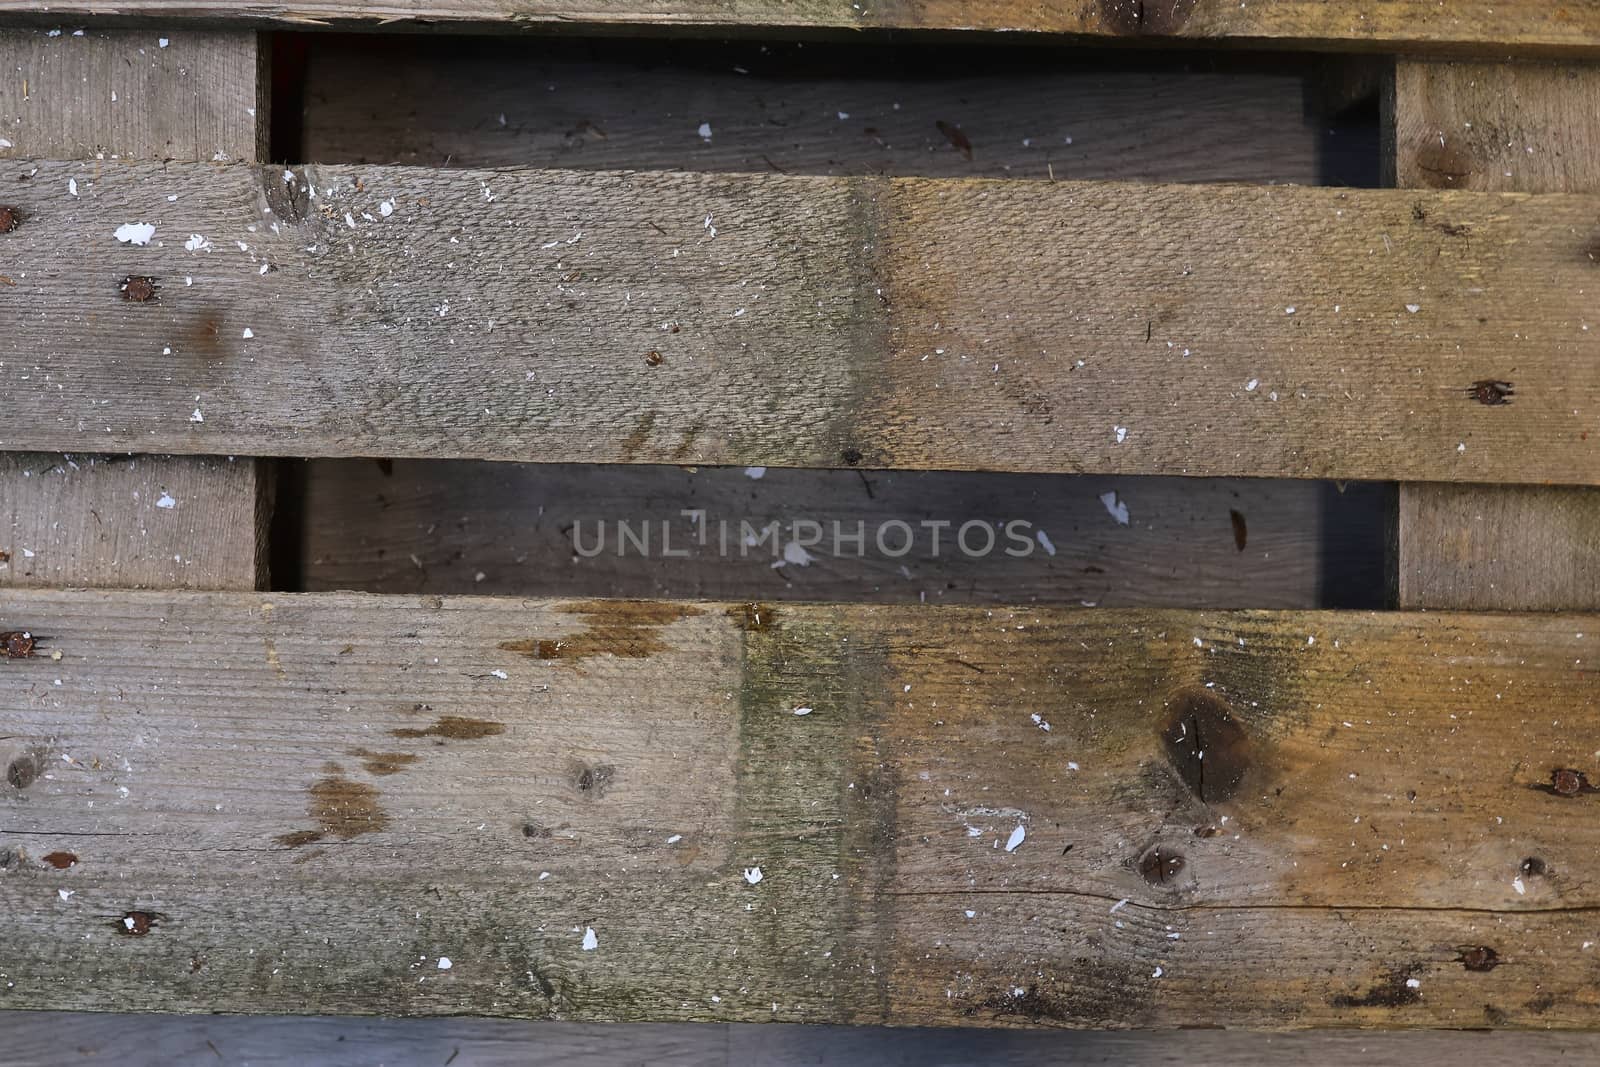 Very old wooden crates with some cracks in a close up view by MP_foto71